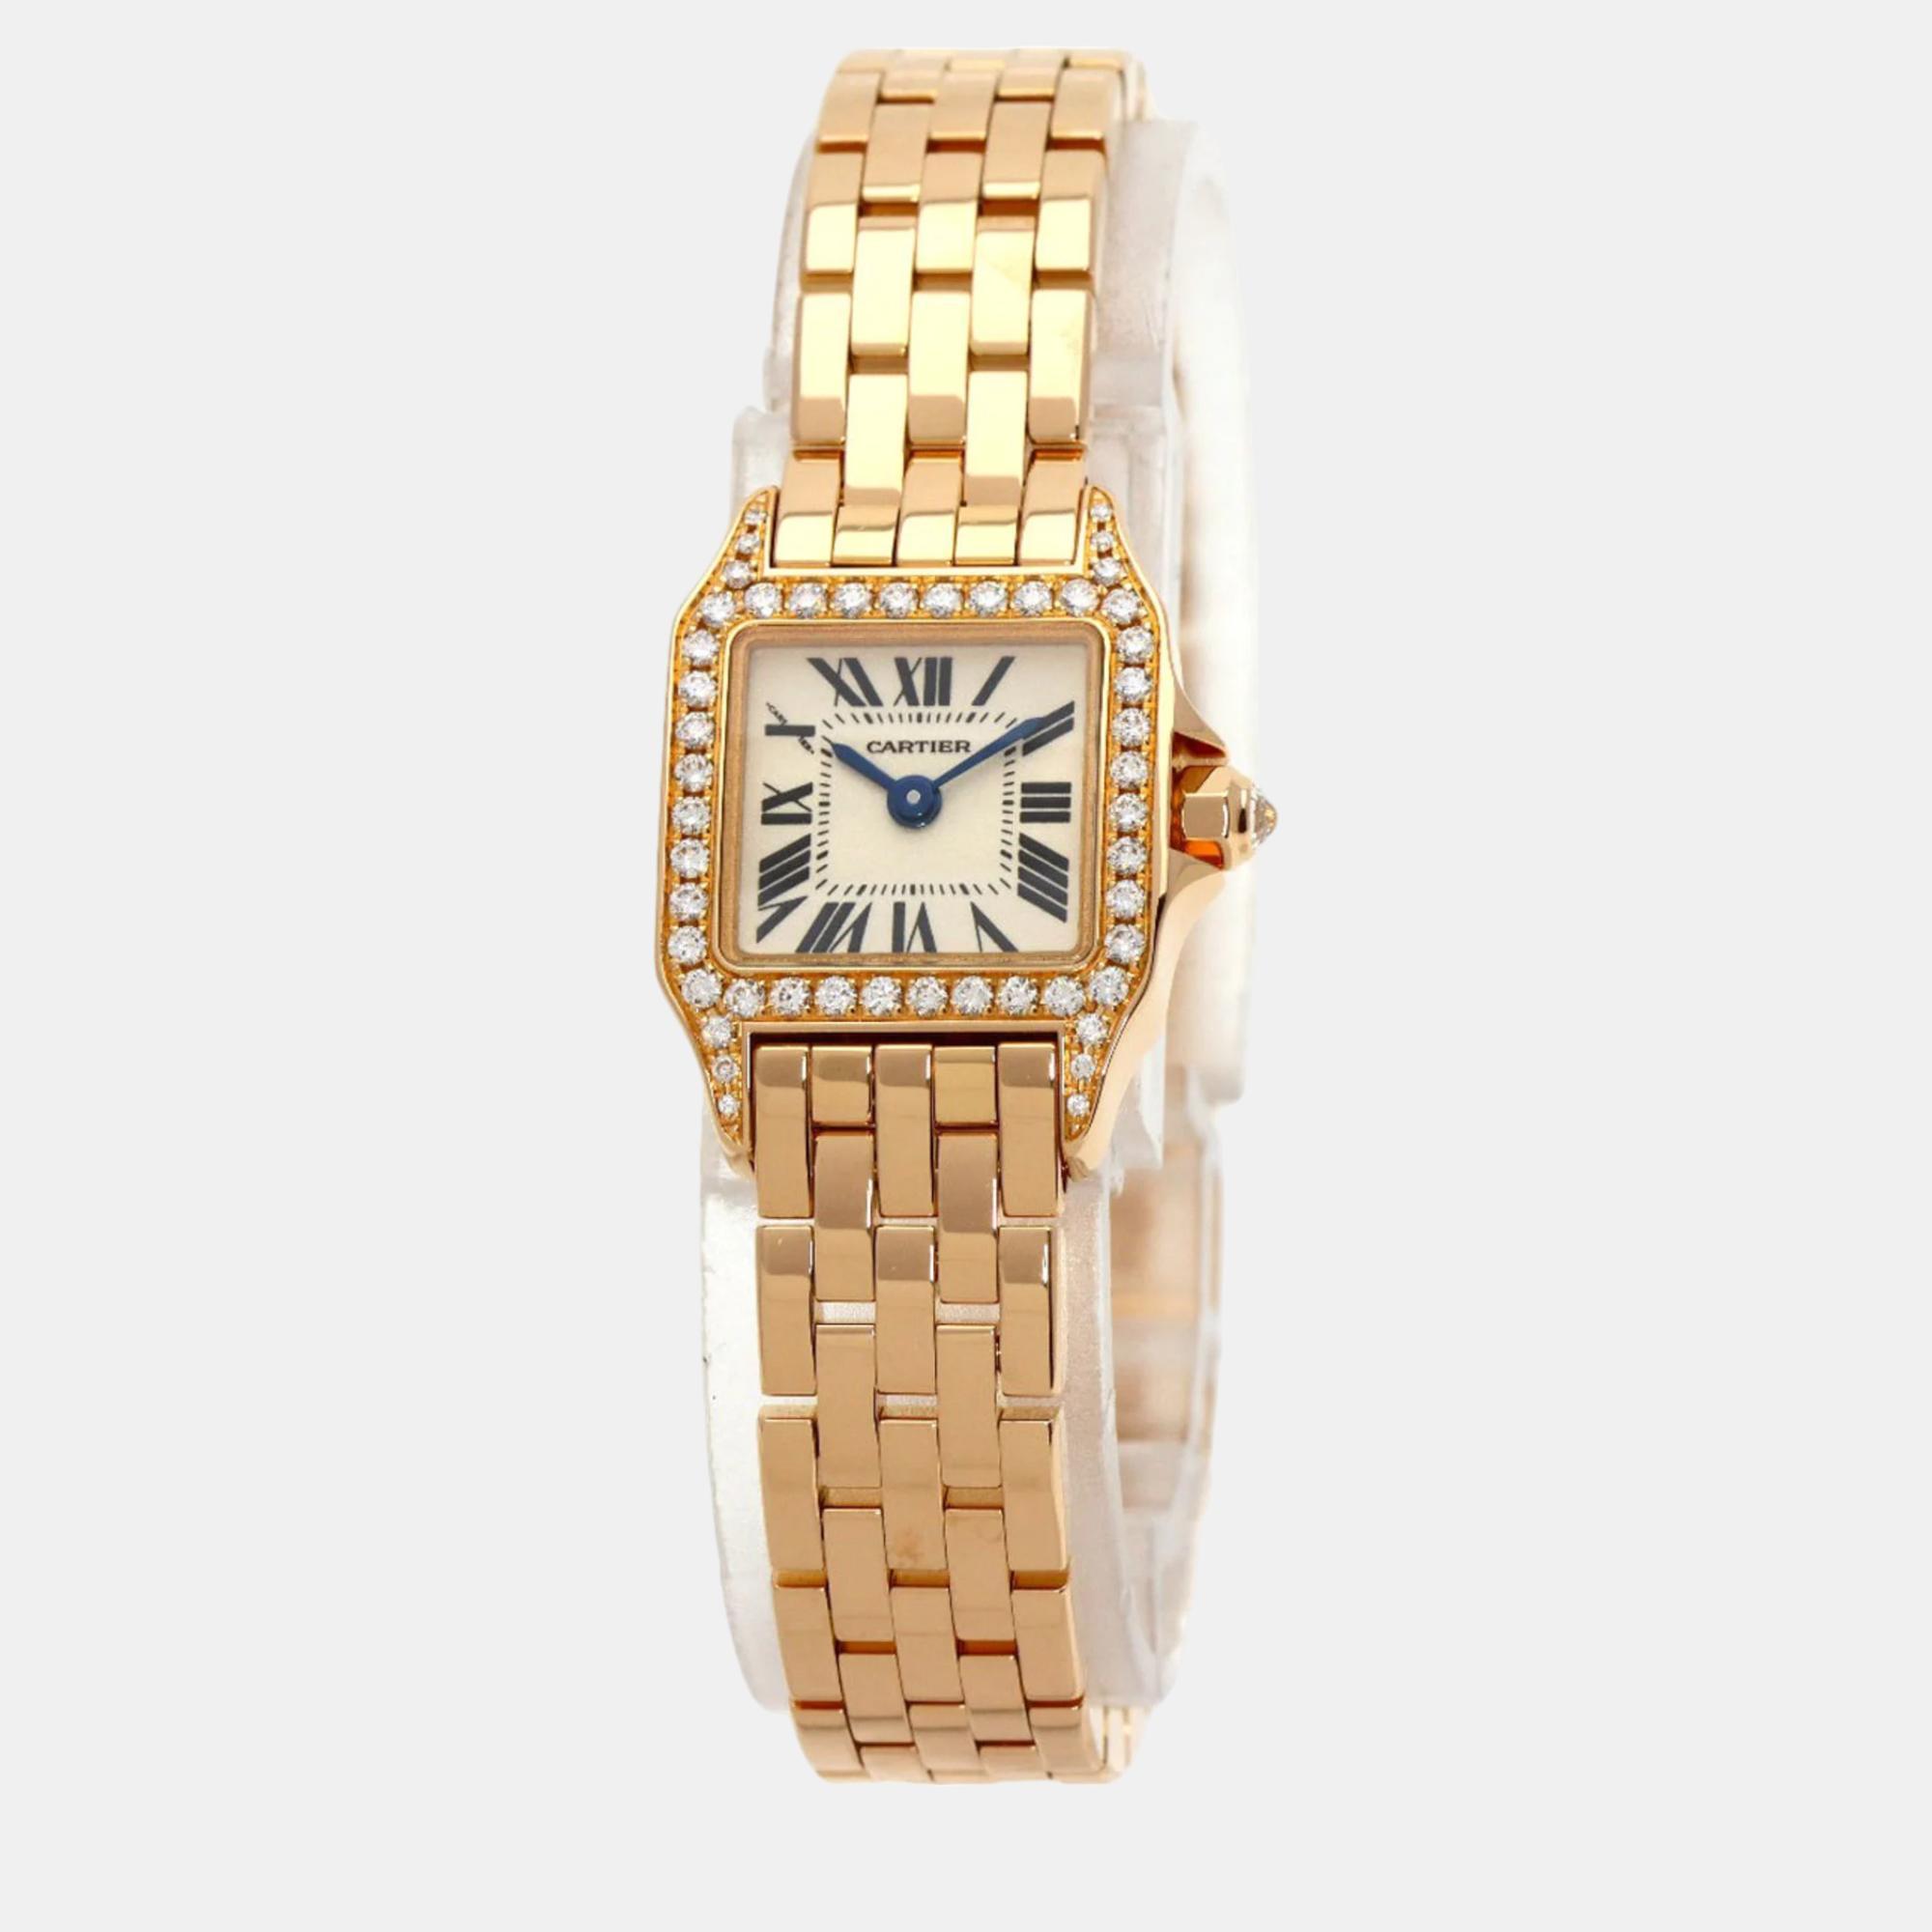 A meticulously crafted watch holds the promise of enduring appeal all day comfort and investment value. Carefully assembled and finished to stand out on your wrist this Cartier timepiece is a purchase you will cherish.